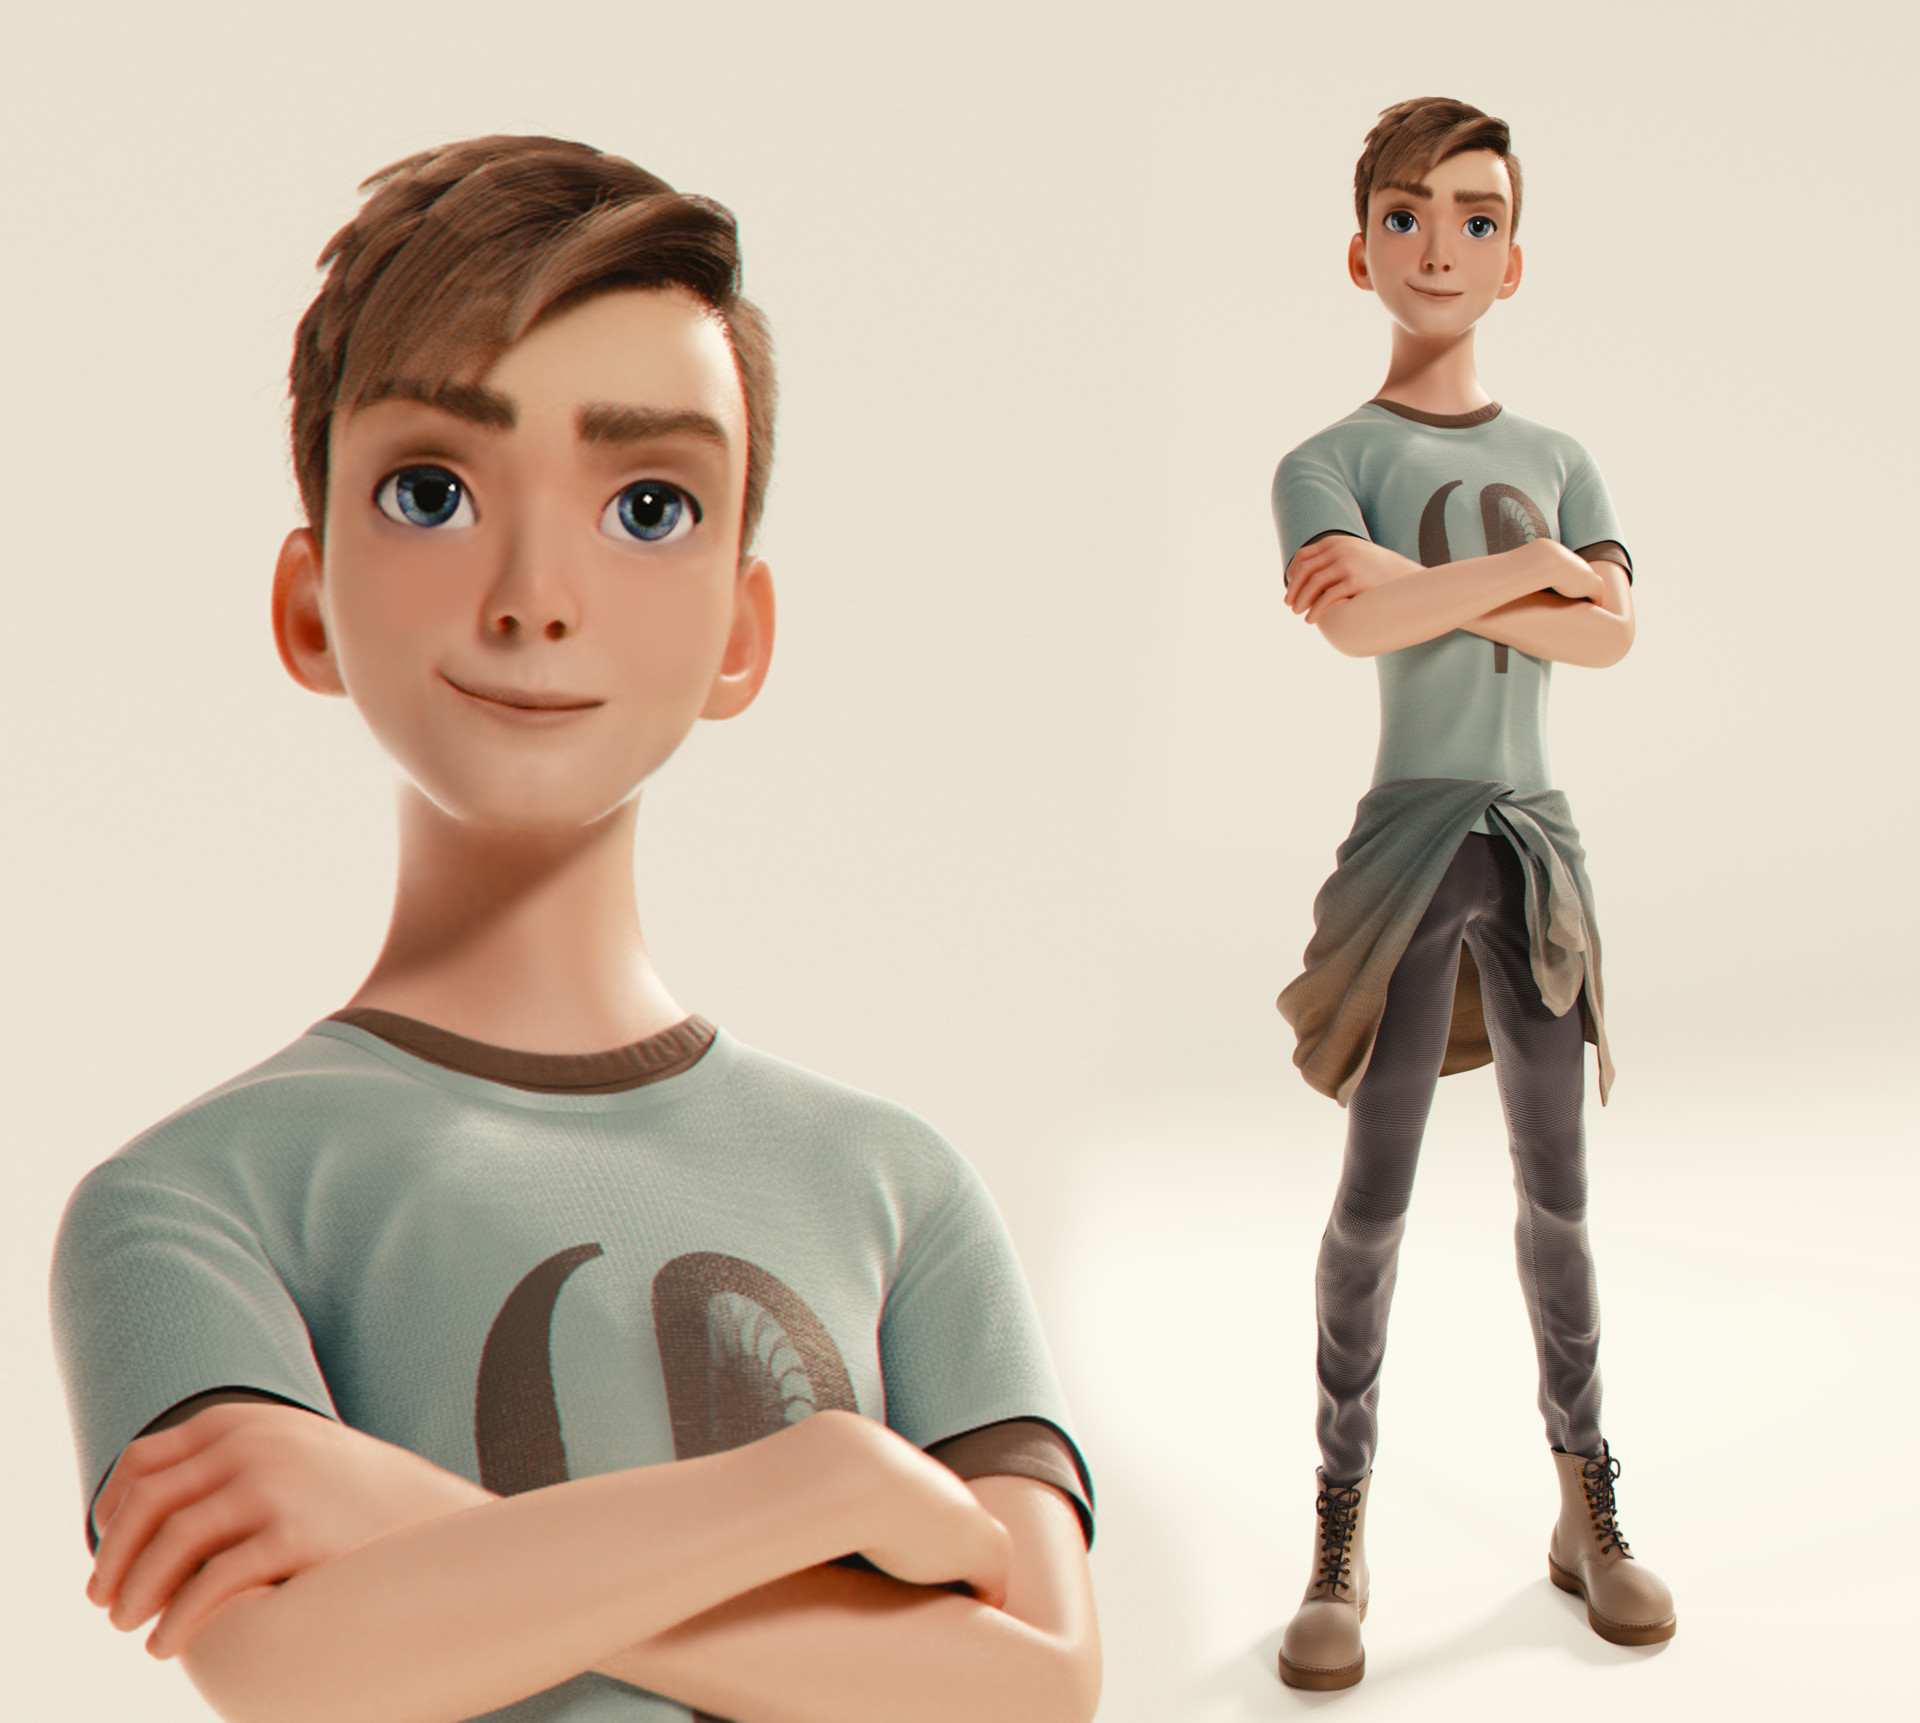 Cartoon Character Reference Images For 3d Modeling Reference Images